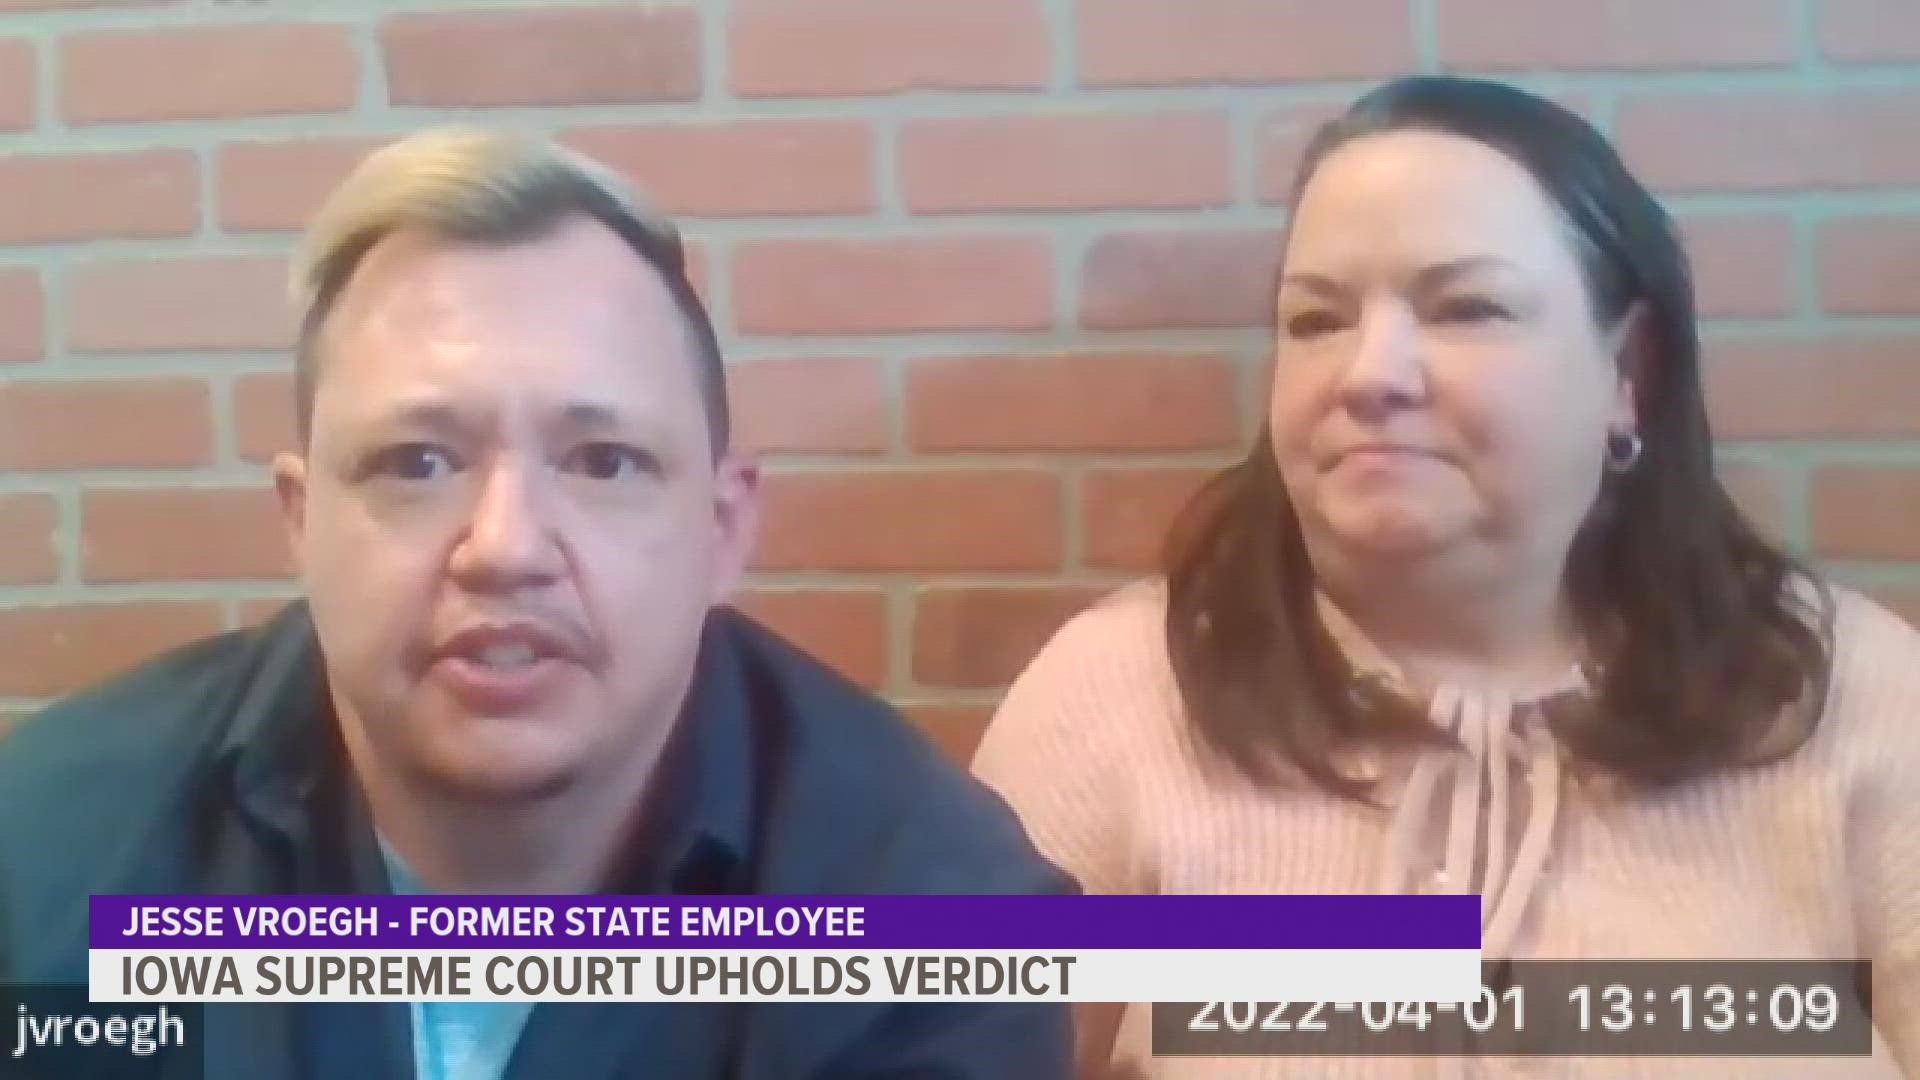 Jesse Vroegh, a former nurse at a state prison for women, has won his discrimination lawsuit based on gender identity and the jury's $120,000 damages verdict.